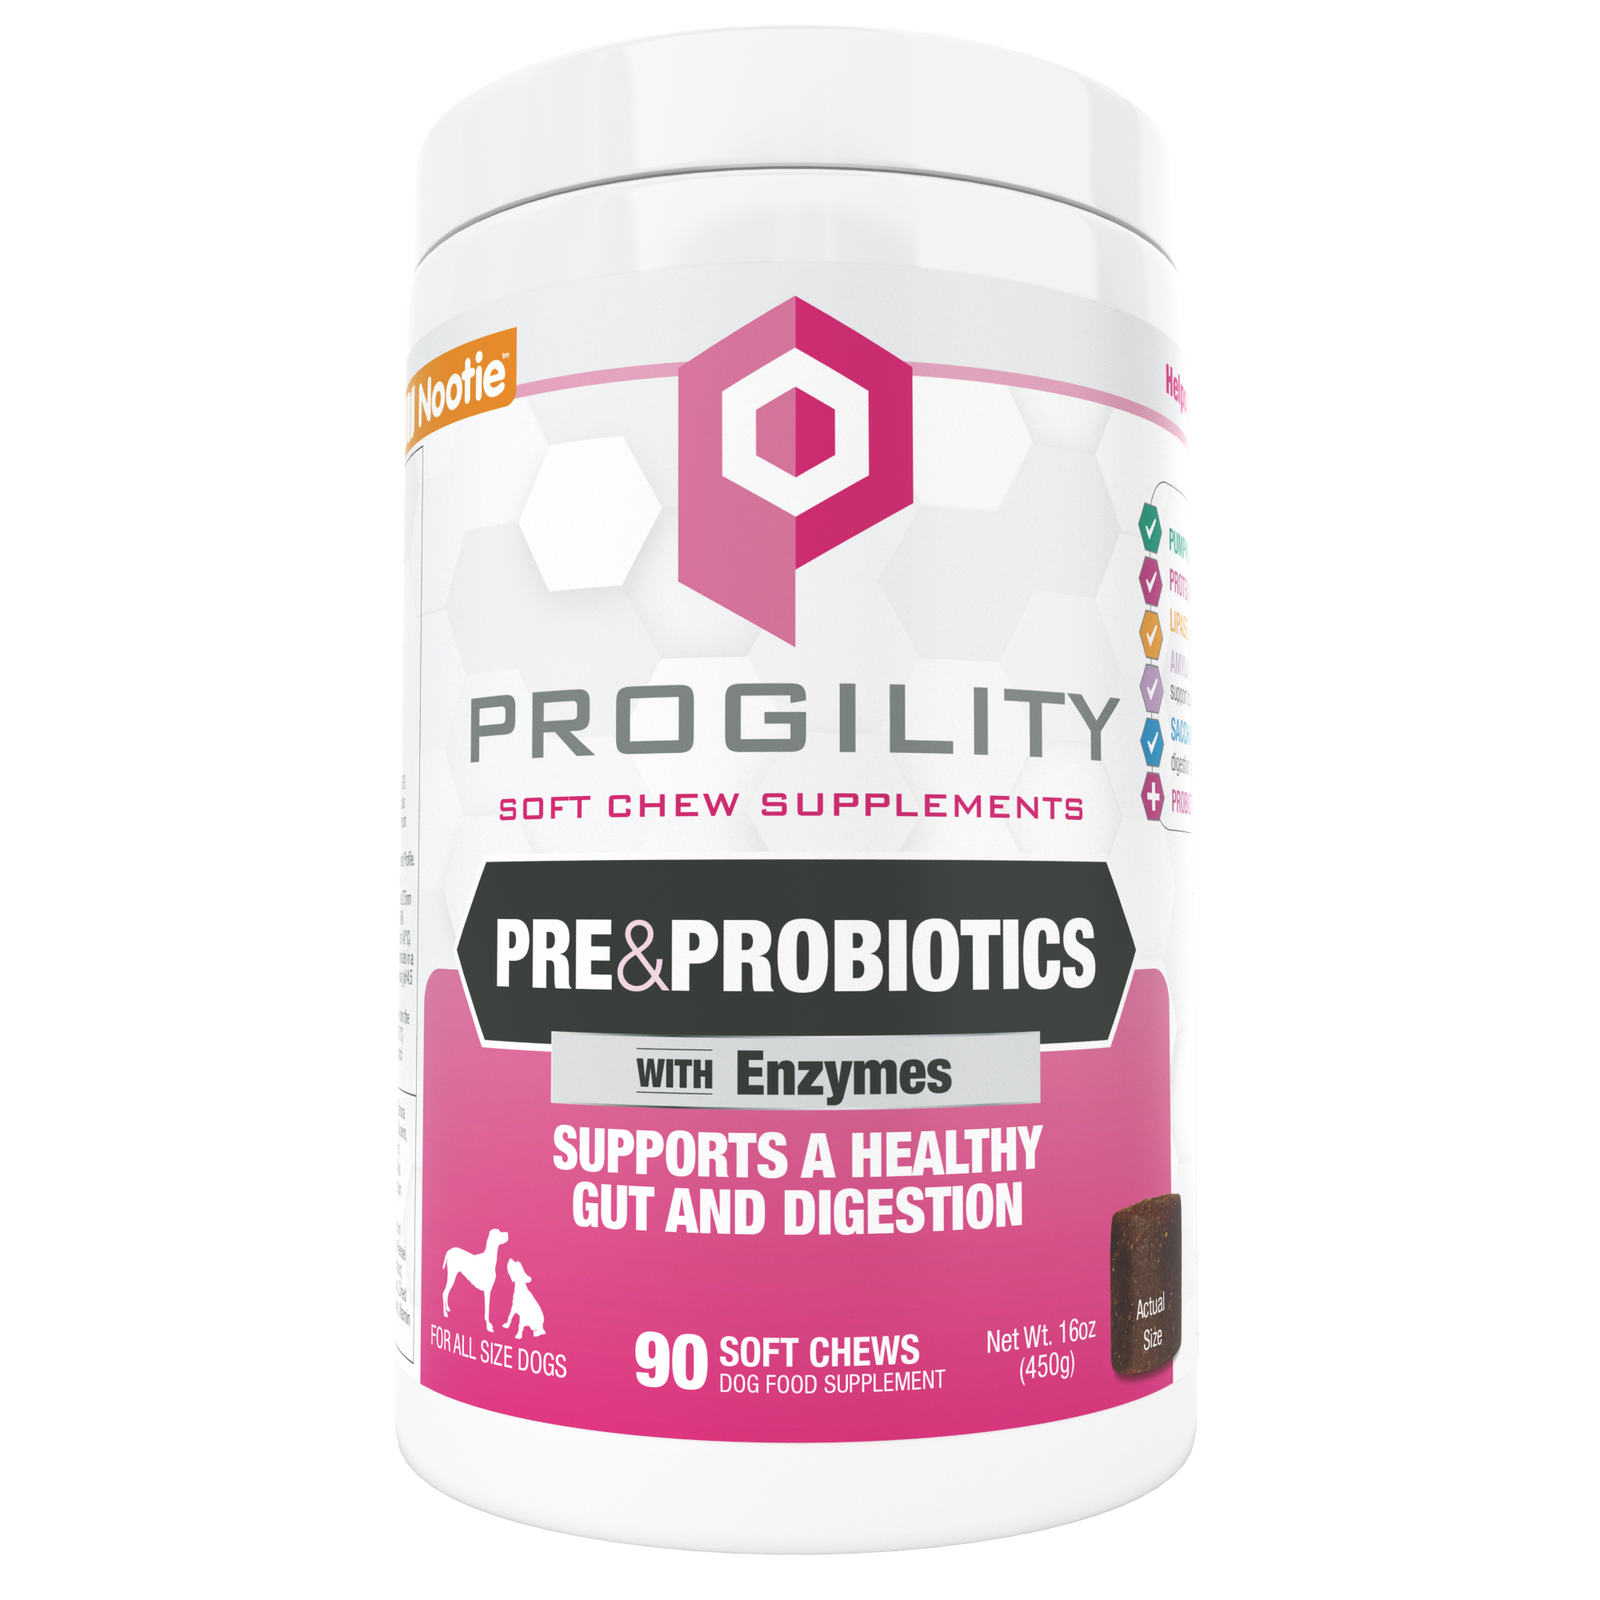 Progility Pre & Probiotics Soft Chew Supplement for Dogs | Helps Maintain a Healthy Gut and Bowels